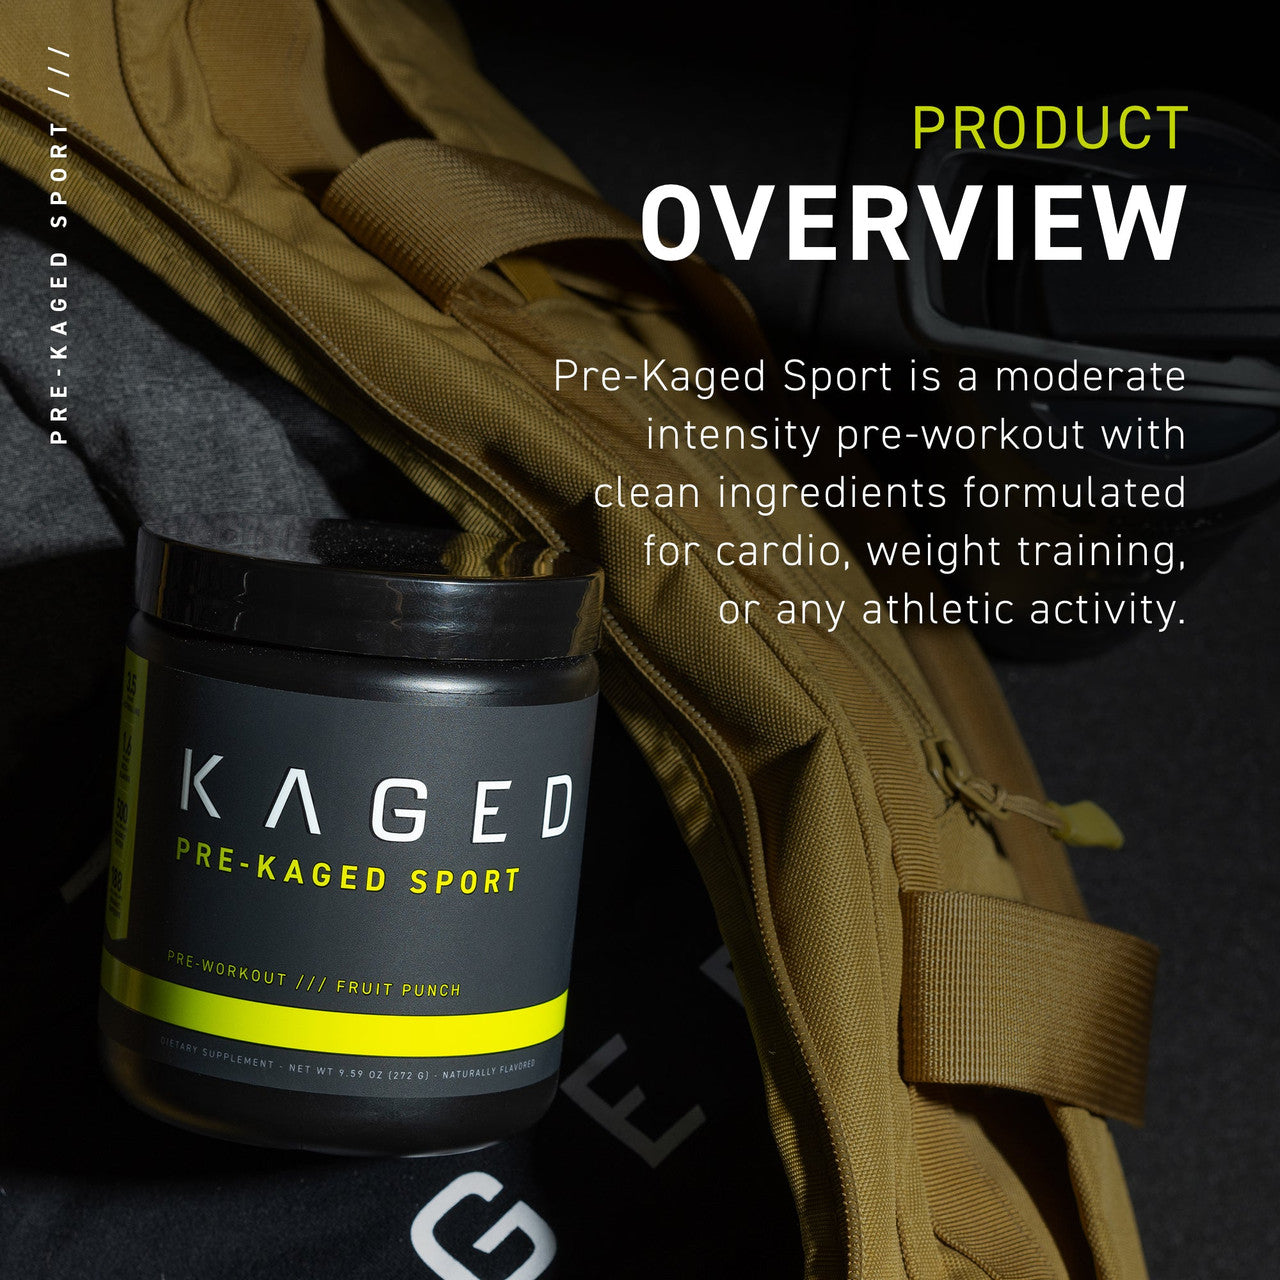 Kaged Muscle Pre-Kaged Sport overview